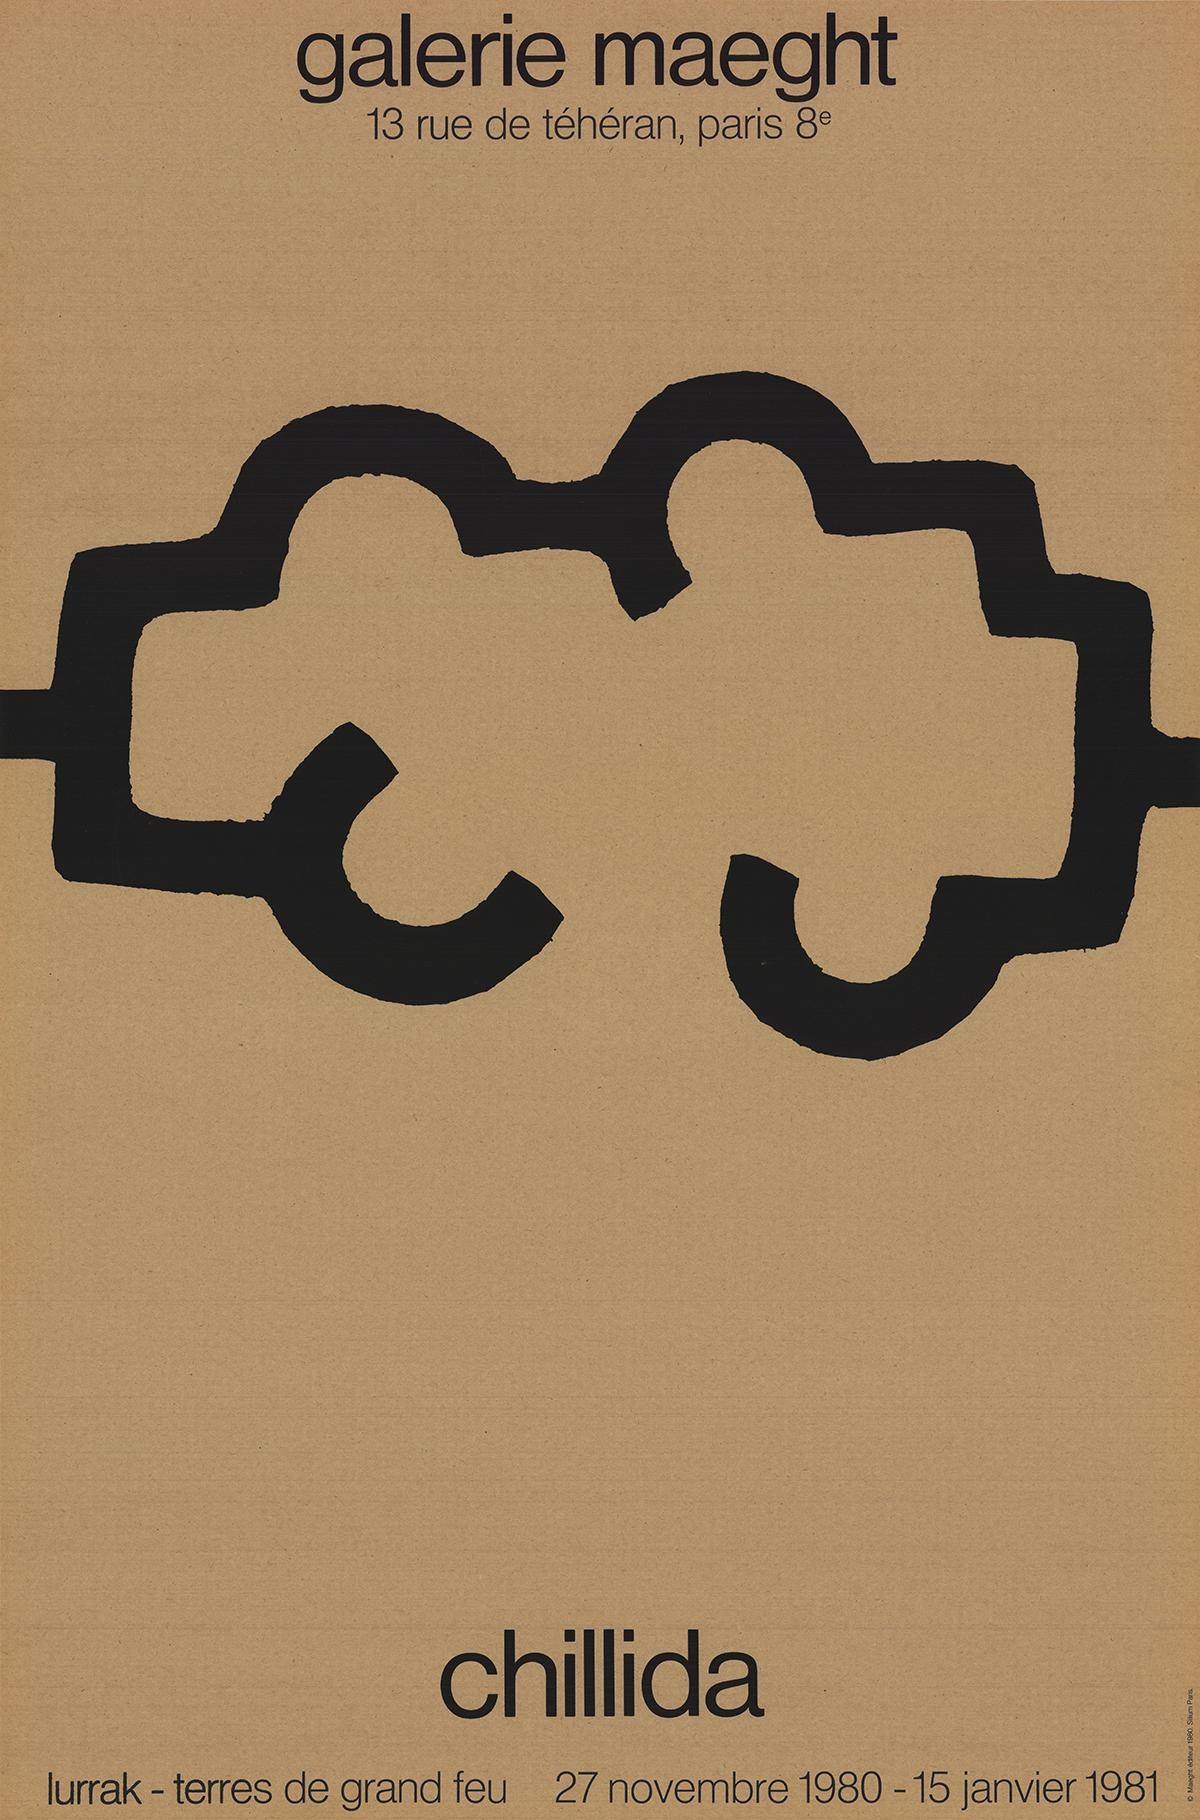 "Galerie Maeght" by Eduardo Chillida, Unsigned Lithograph printed in 1980.  The overall size of the Lithograph is 29.75 x 19.5 inches.  The condition of this piece has been graded as A: Mint.